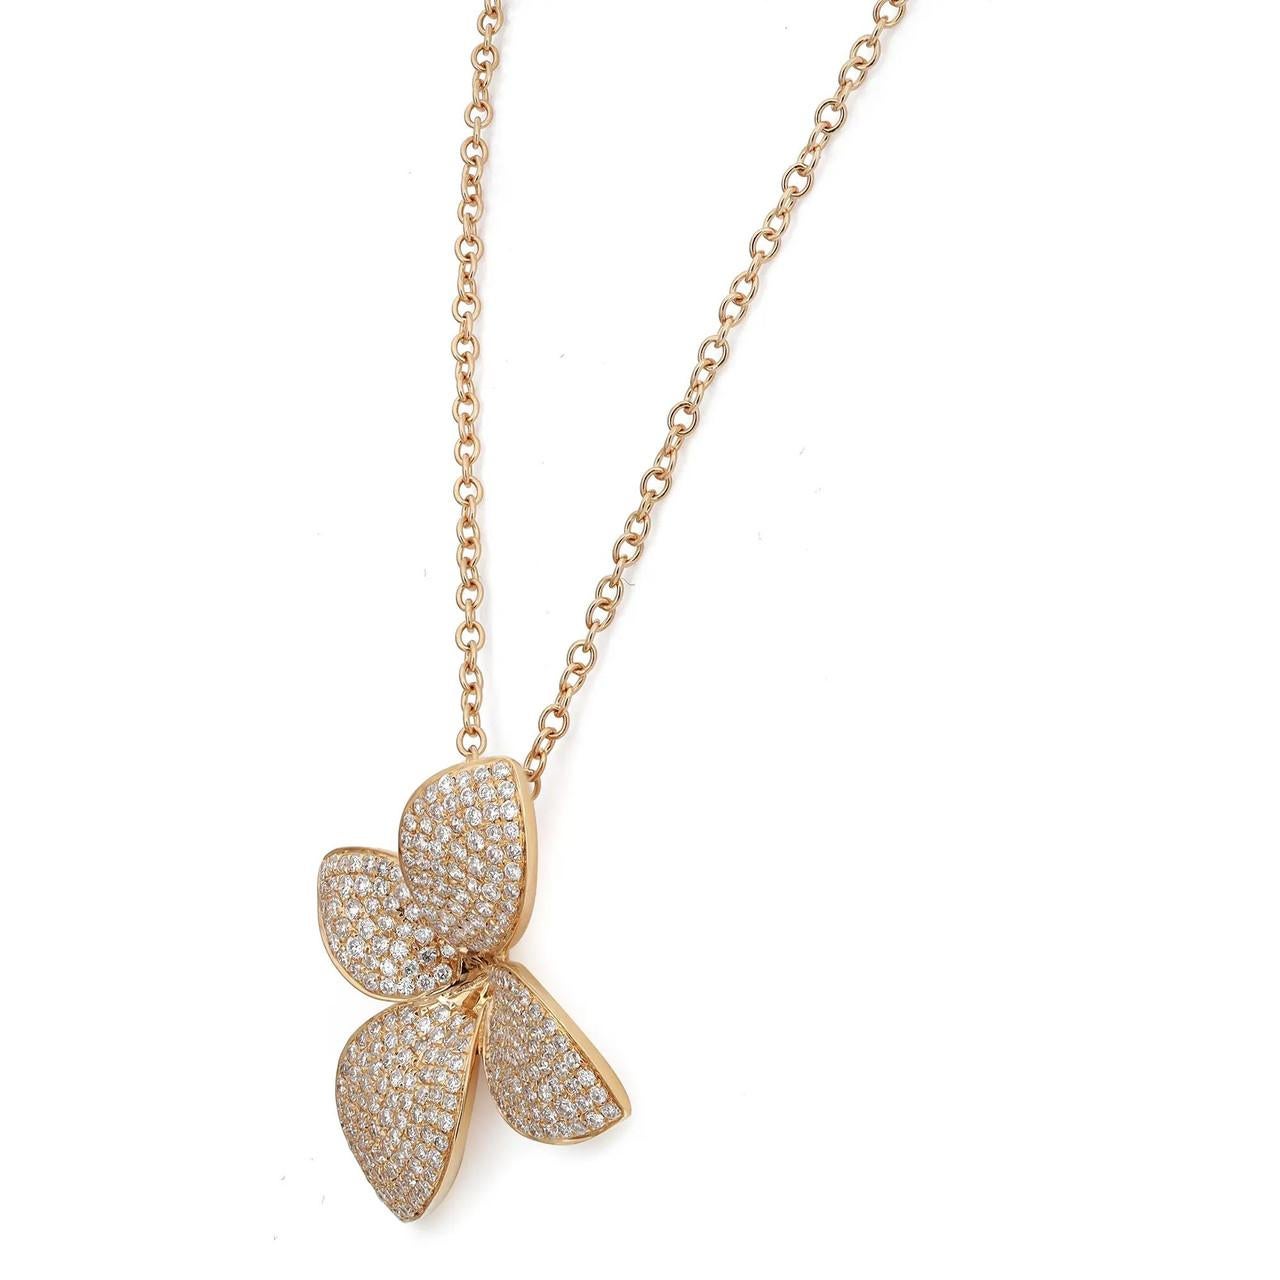 Introducing our exquisite and modern 1.00 Carat Diamond Flower Necklace crafted in lustrous 18K Yellow Gold. This necklace features a captivating asymmetrical flower design adorned with radiant round diamonds. The diamonds, sparkling with